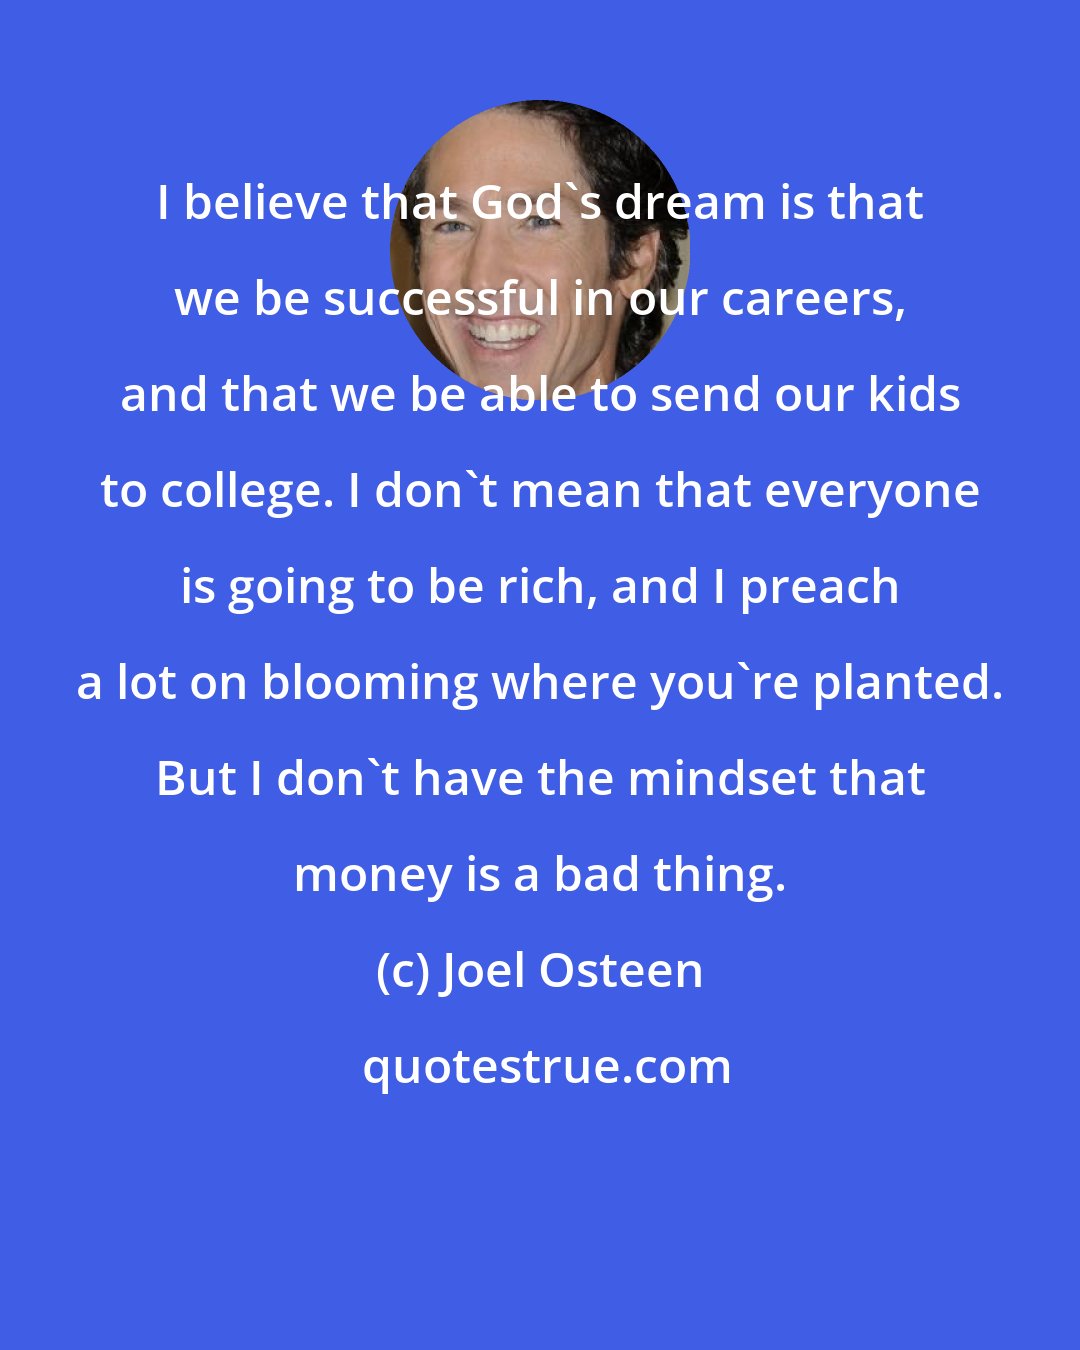 Joel Osteen: I believe that God's dream is that we be successful in our careers, and that we be able to send our kids to college. I don't mean that everyone is going to be rich, and I preach a lot on blooming where you're planted. But I don't have the mindset that money is a bad thing.